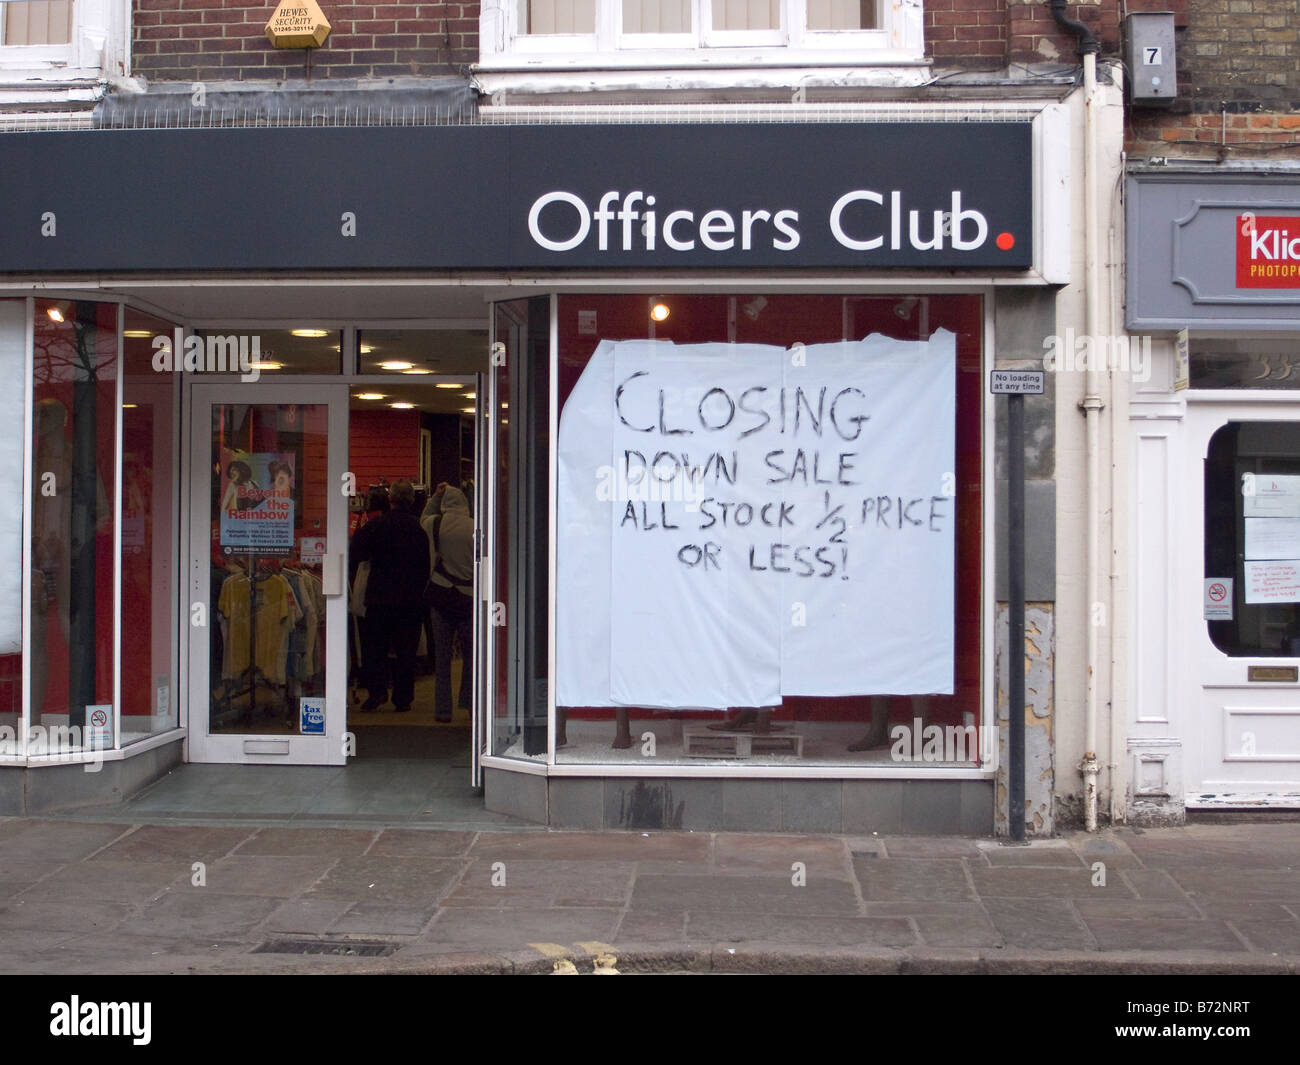 Officers Club shop closing down sale, Chichester, West Sussex, UK Stock Photo